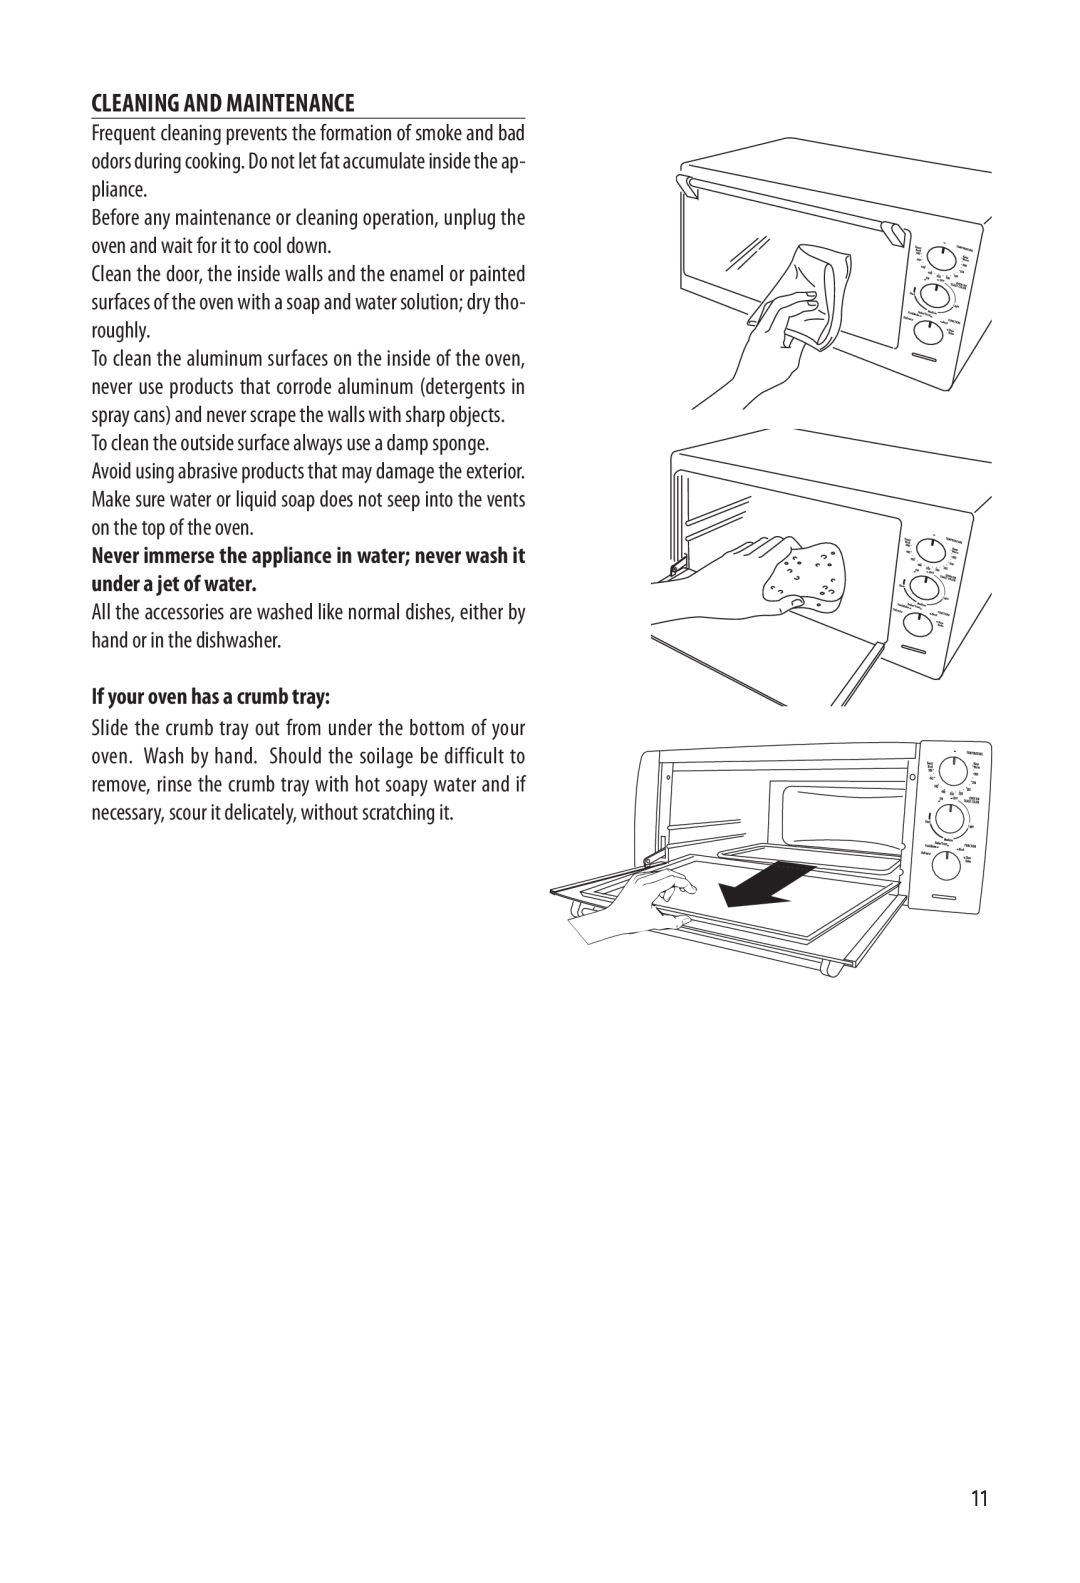 DeLonghi EO1270 1B specifications Cleaning And Maintenance, If your oven has a crumb tray 